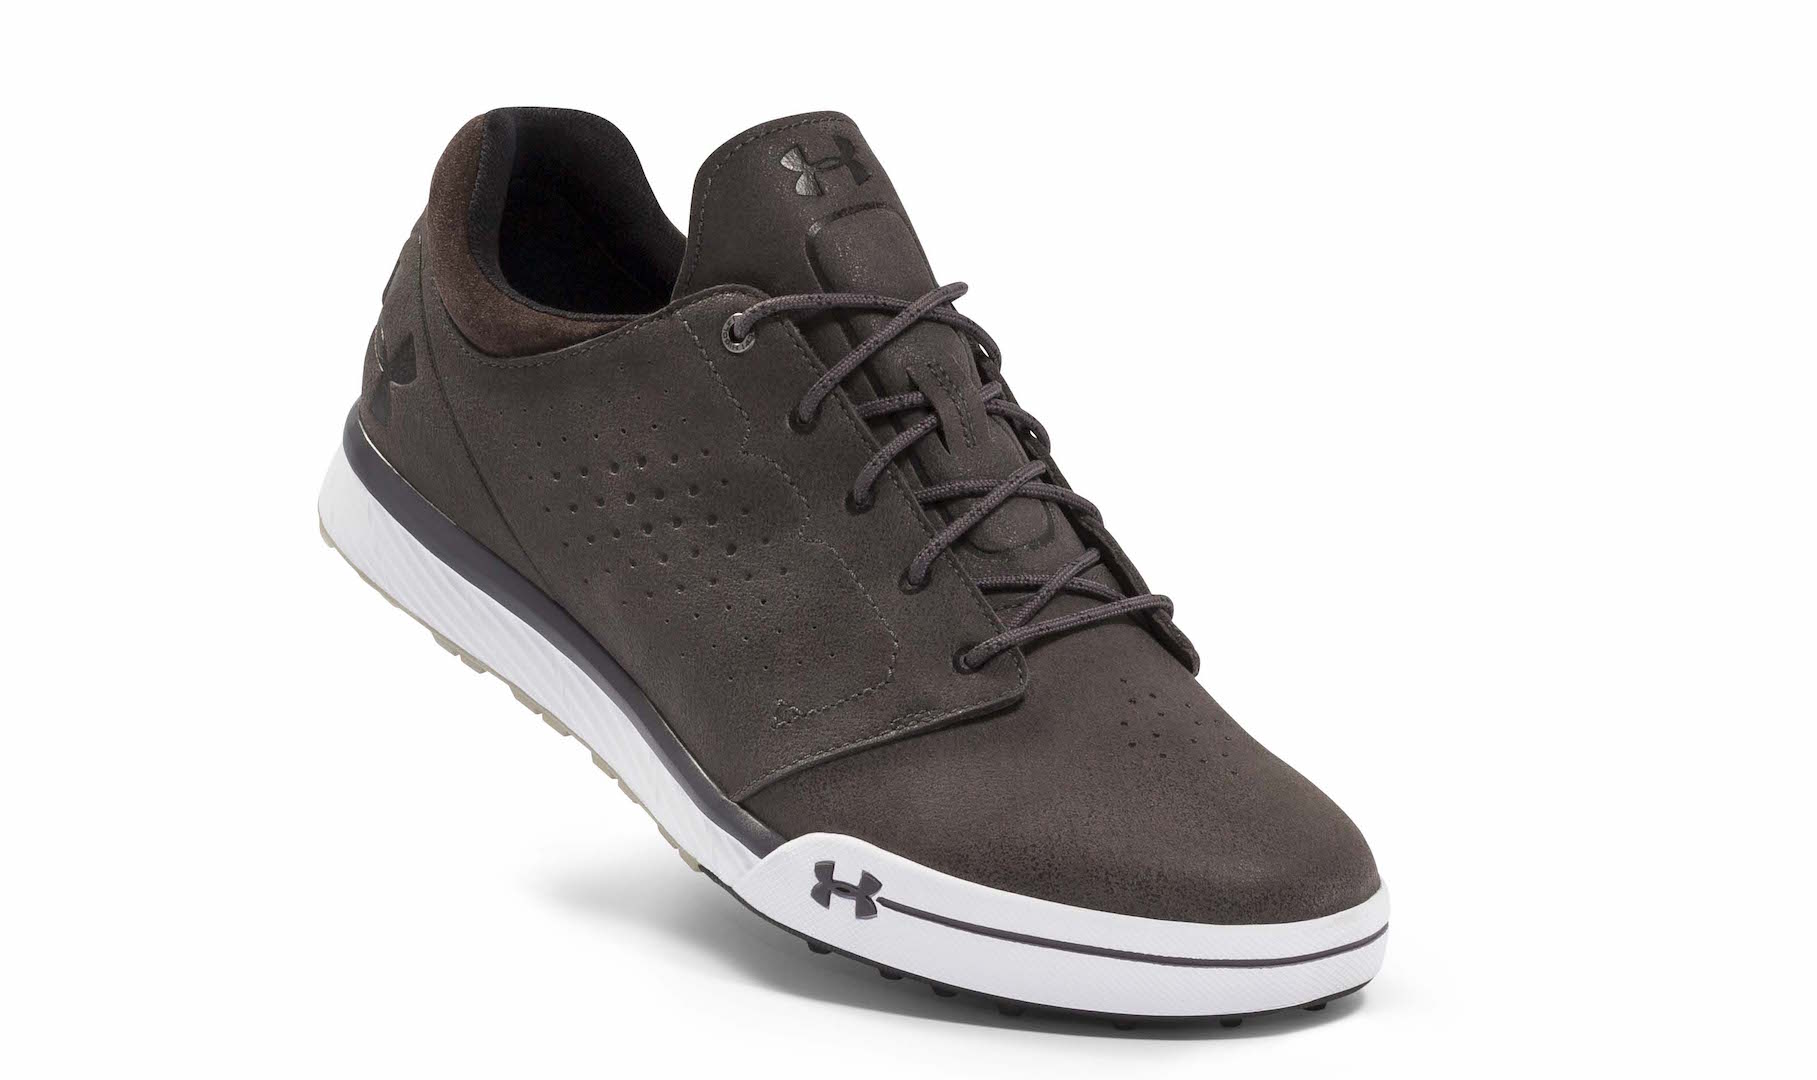 under armour summer golf shoes